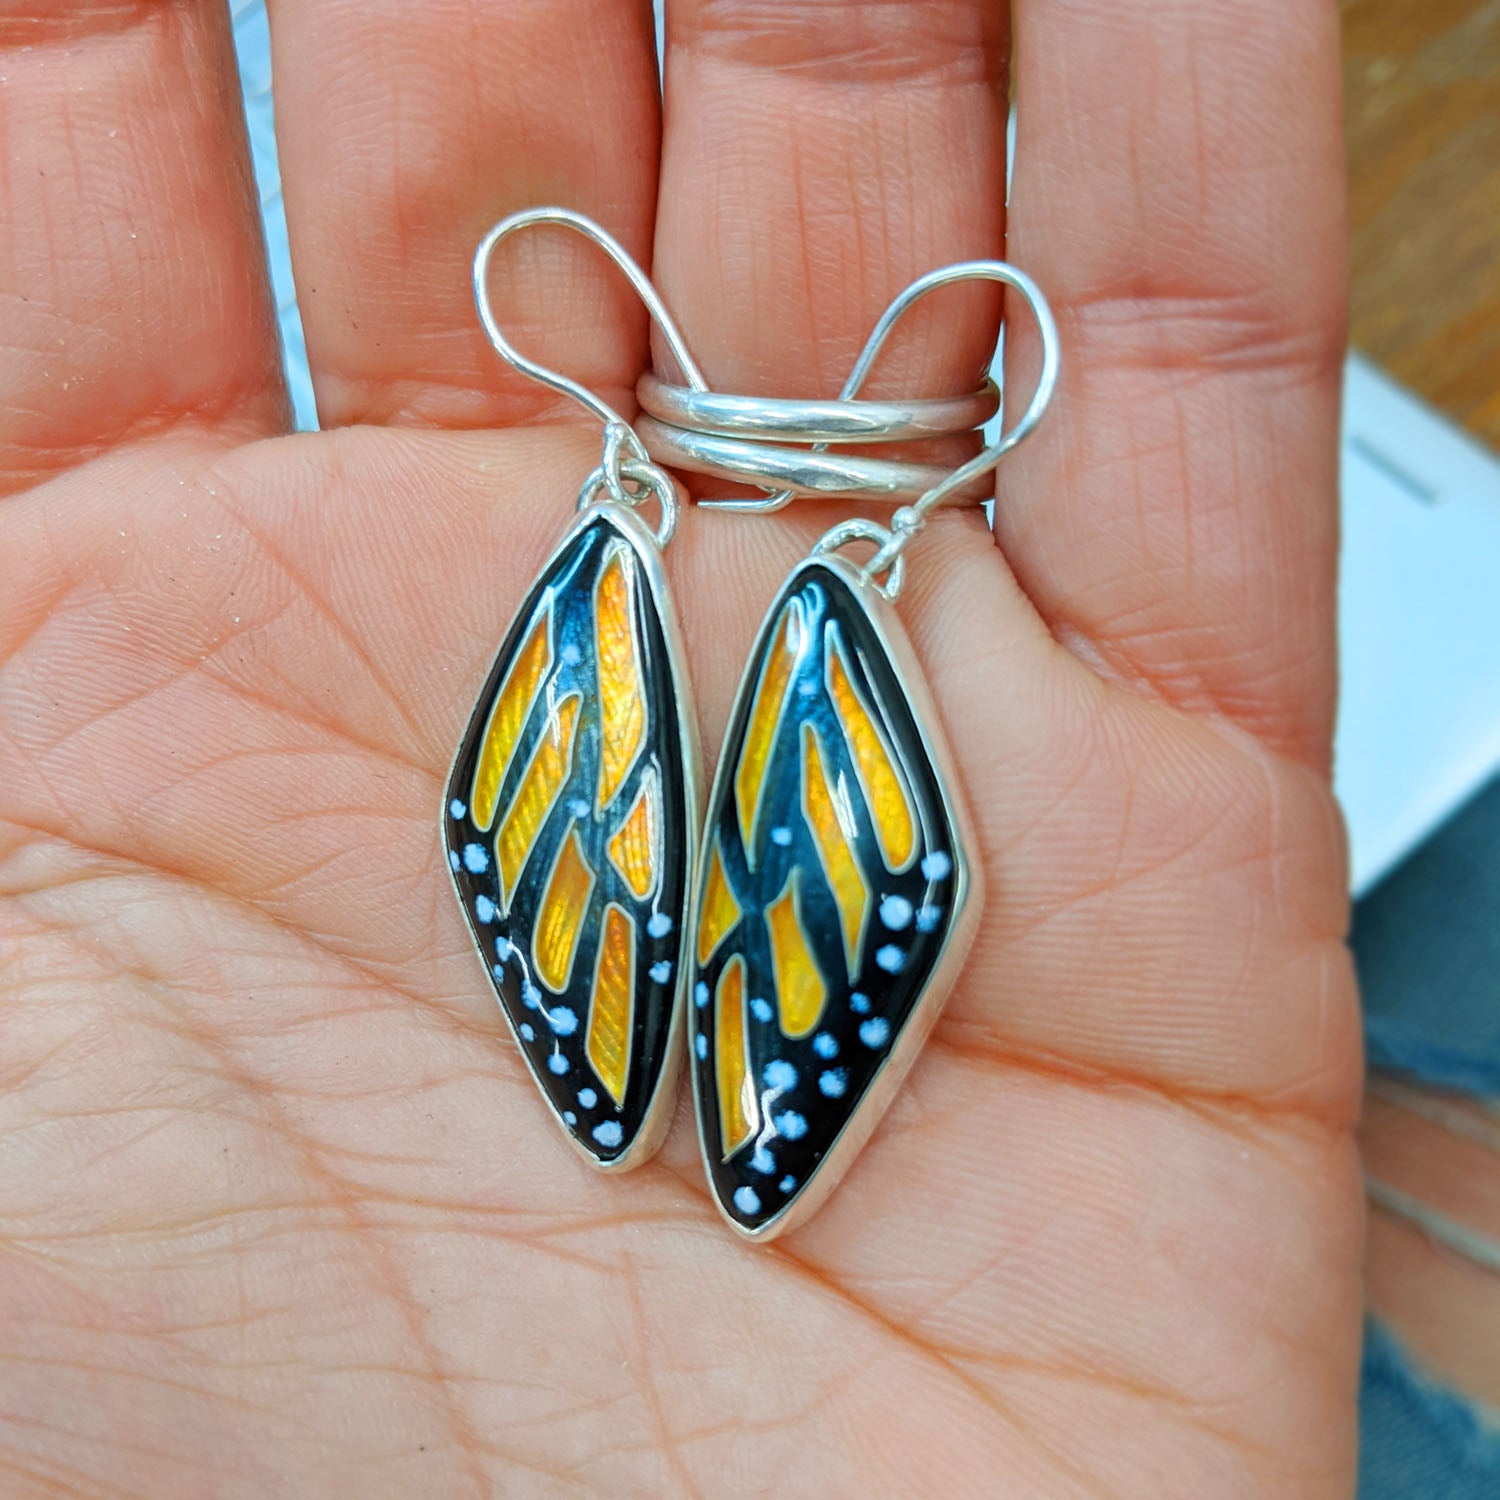 Top more than 188 monarch butterfly earrings super hot